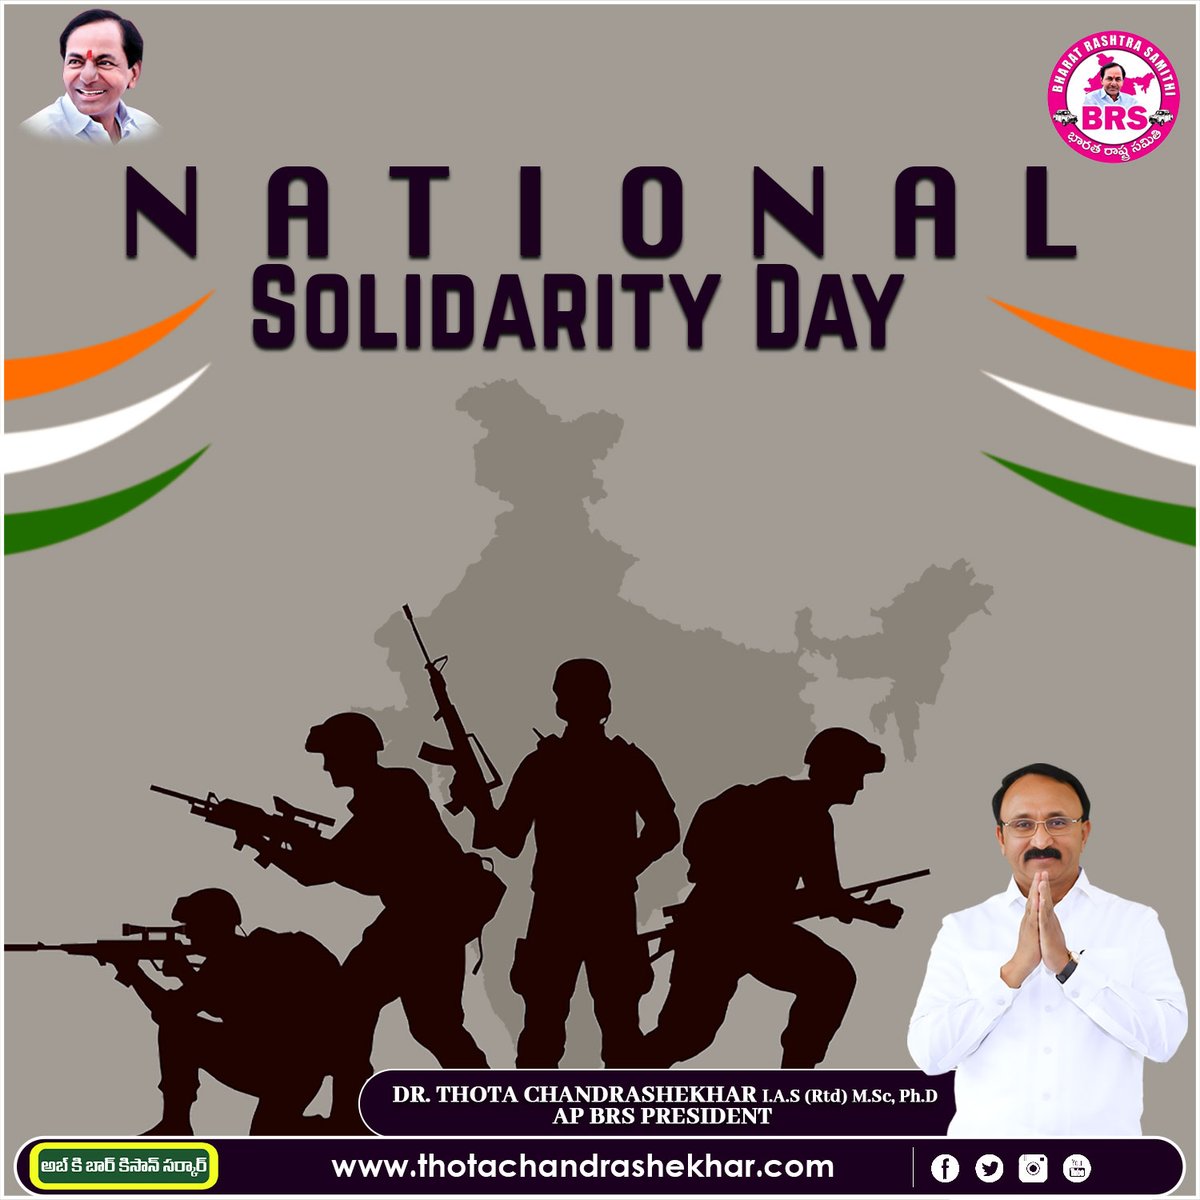 As we celebrate National Solidarity Day, let's remember that together we are stronger, and our unity is our greatest strength.

#solidarityday #india #NationalSolidarityDay #thotachandrashekhar